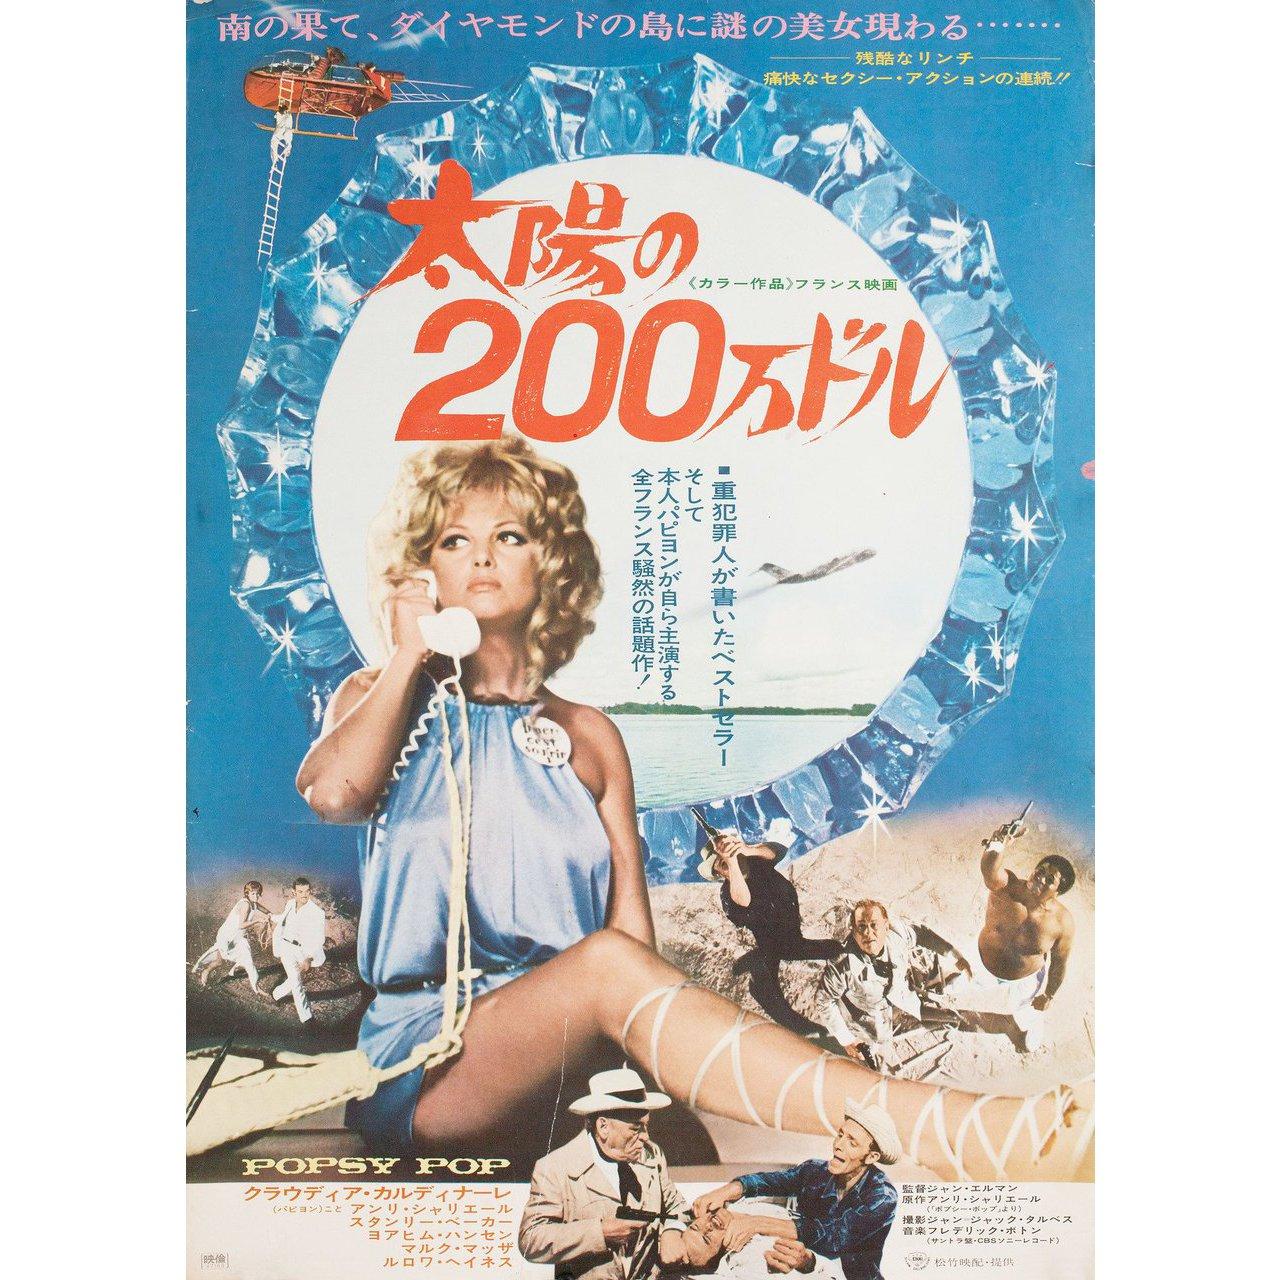 Original 1972 Japanese B2 poster for the film Popsy Pop (The 21 Carat Snatch) directed by Jean Herman with Claudia Cardinale / Stanley Baker / Henri Charriere / Georges Aminel. Very good condition, rolled with edge tears / handling wear / 6 inch